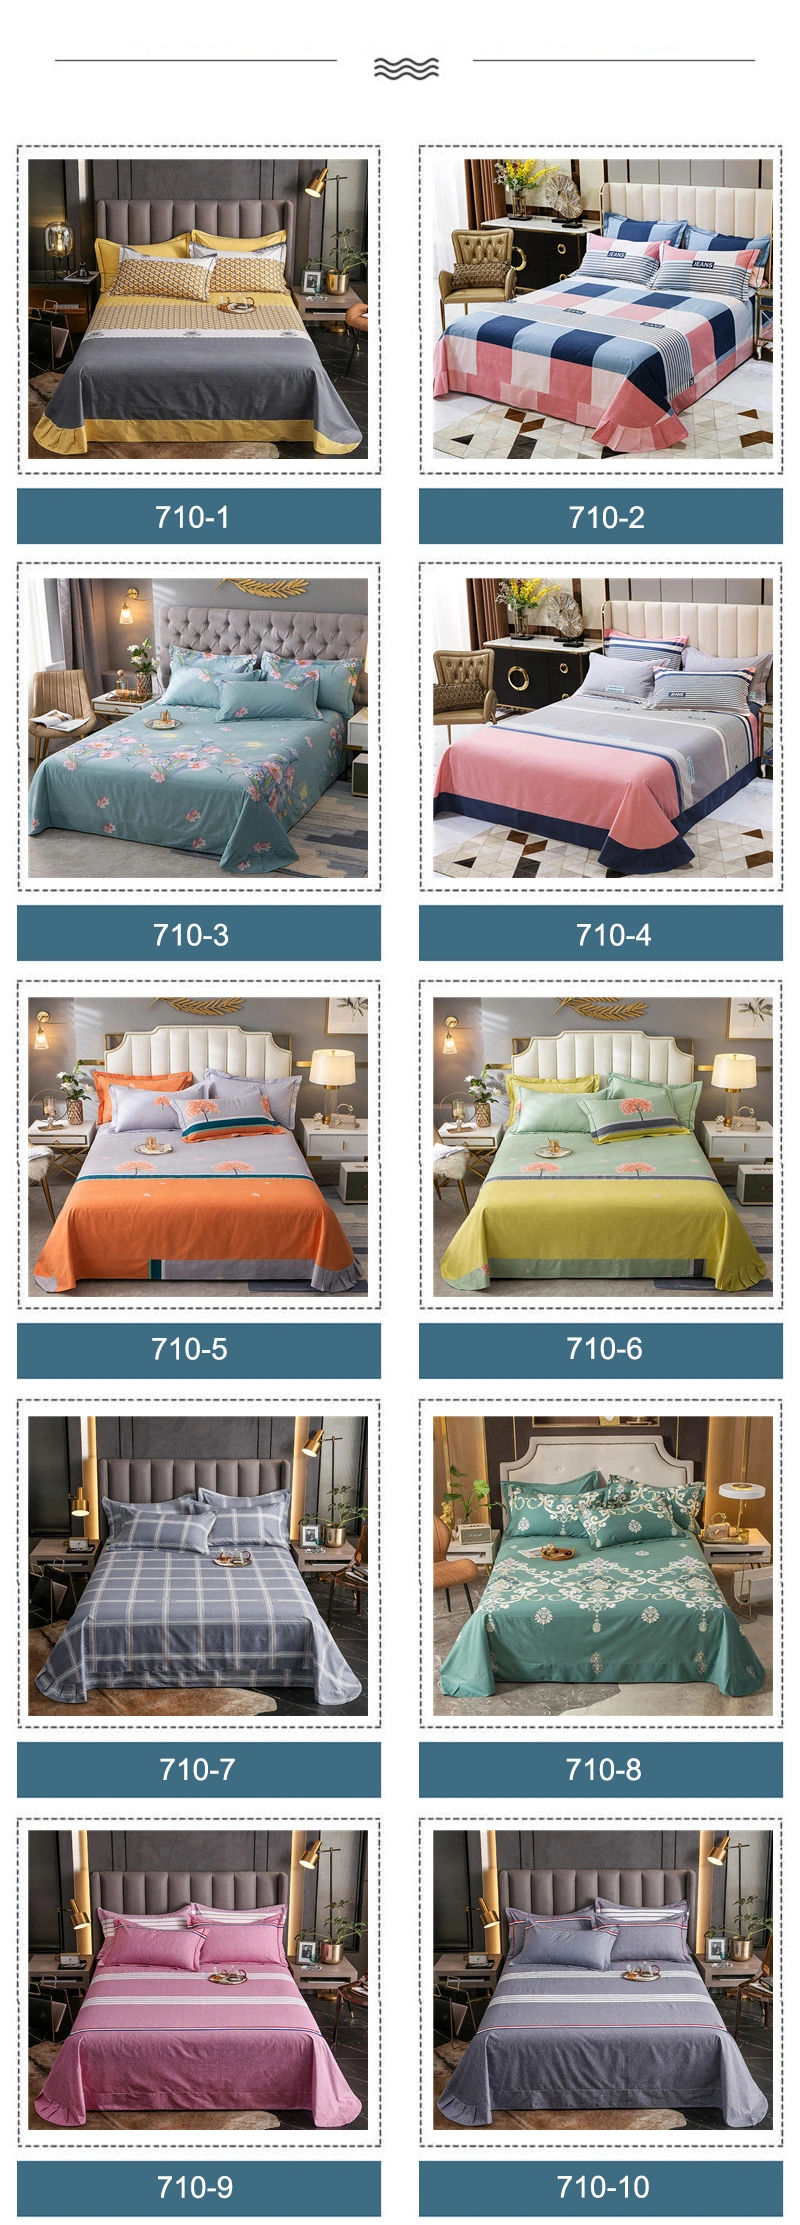 Home Product Bed Sheet Set Cheap Price Soft Wrinkle for Full Bed